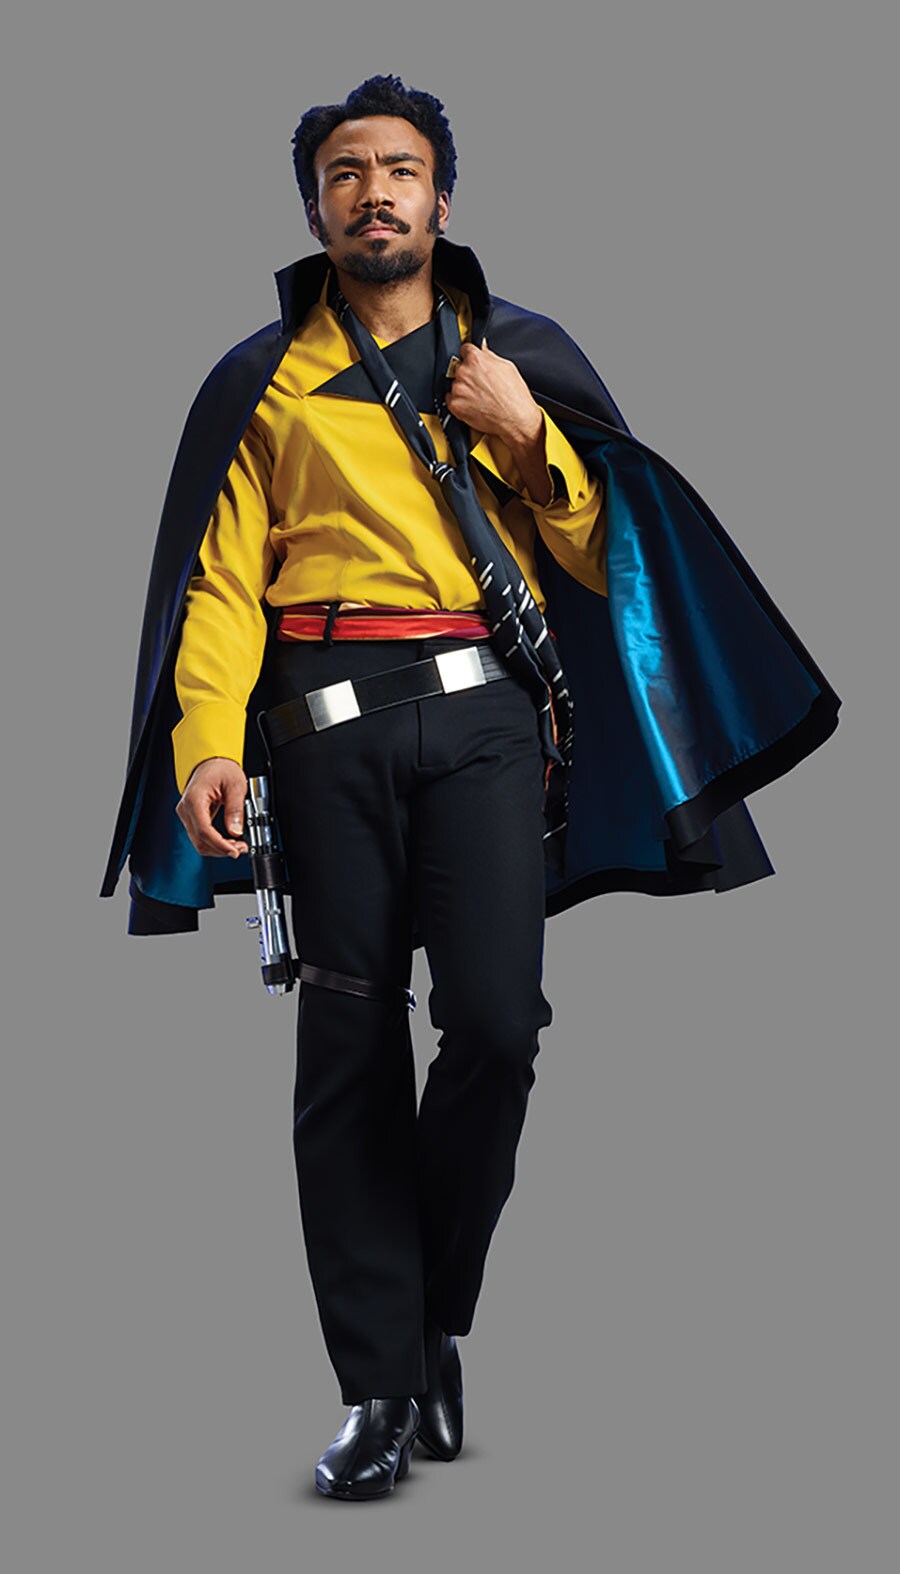 Lando walks while clutching the side of his cape.